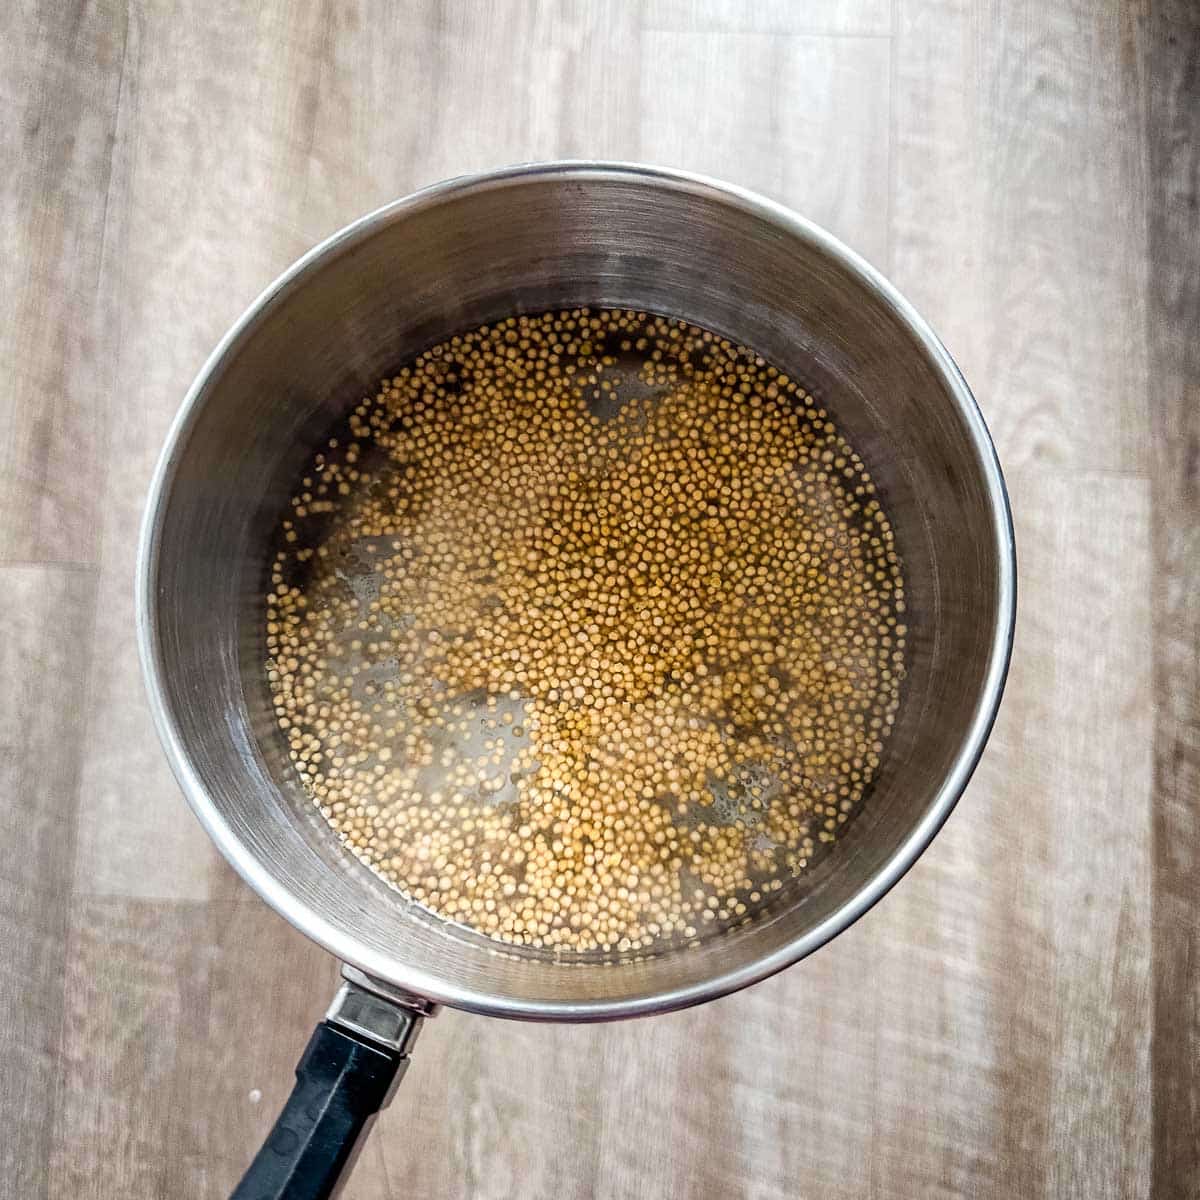 Mustard seeds in boiling water.